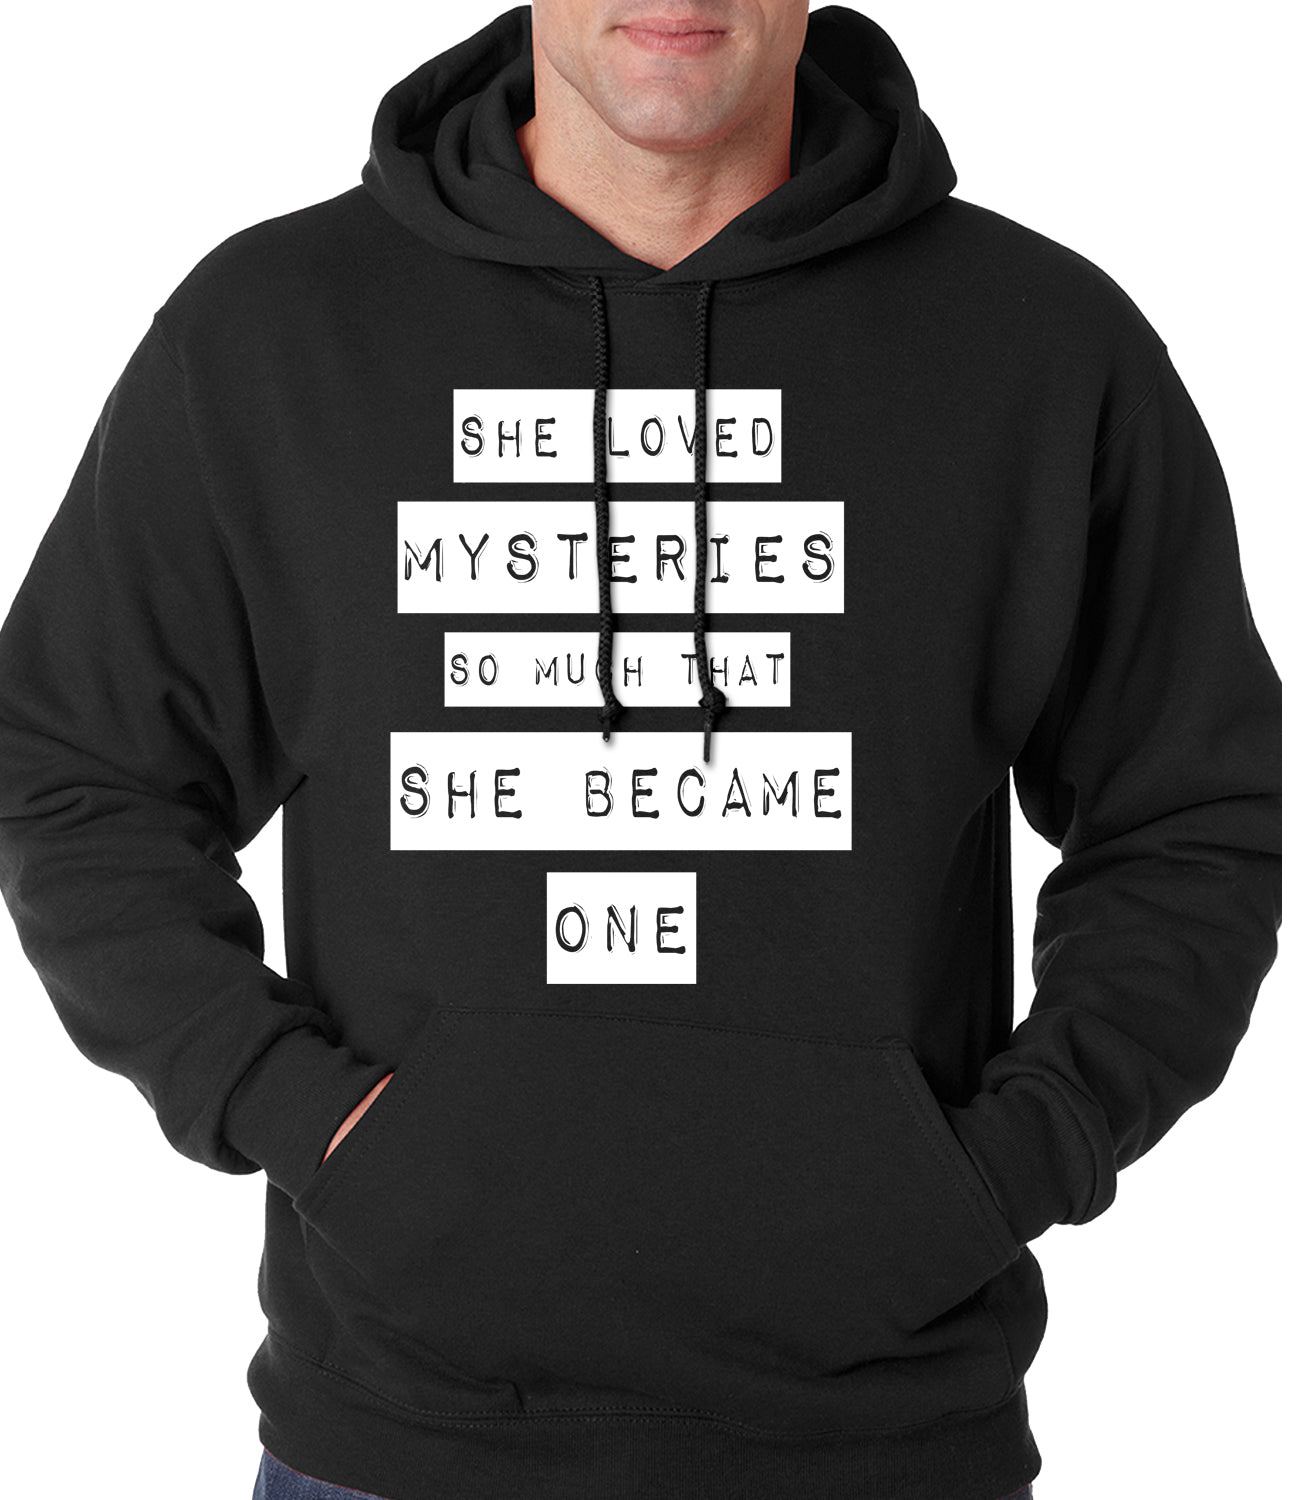 She Loved Mysteries So Much, She Became One Adult Hoodie